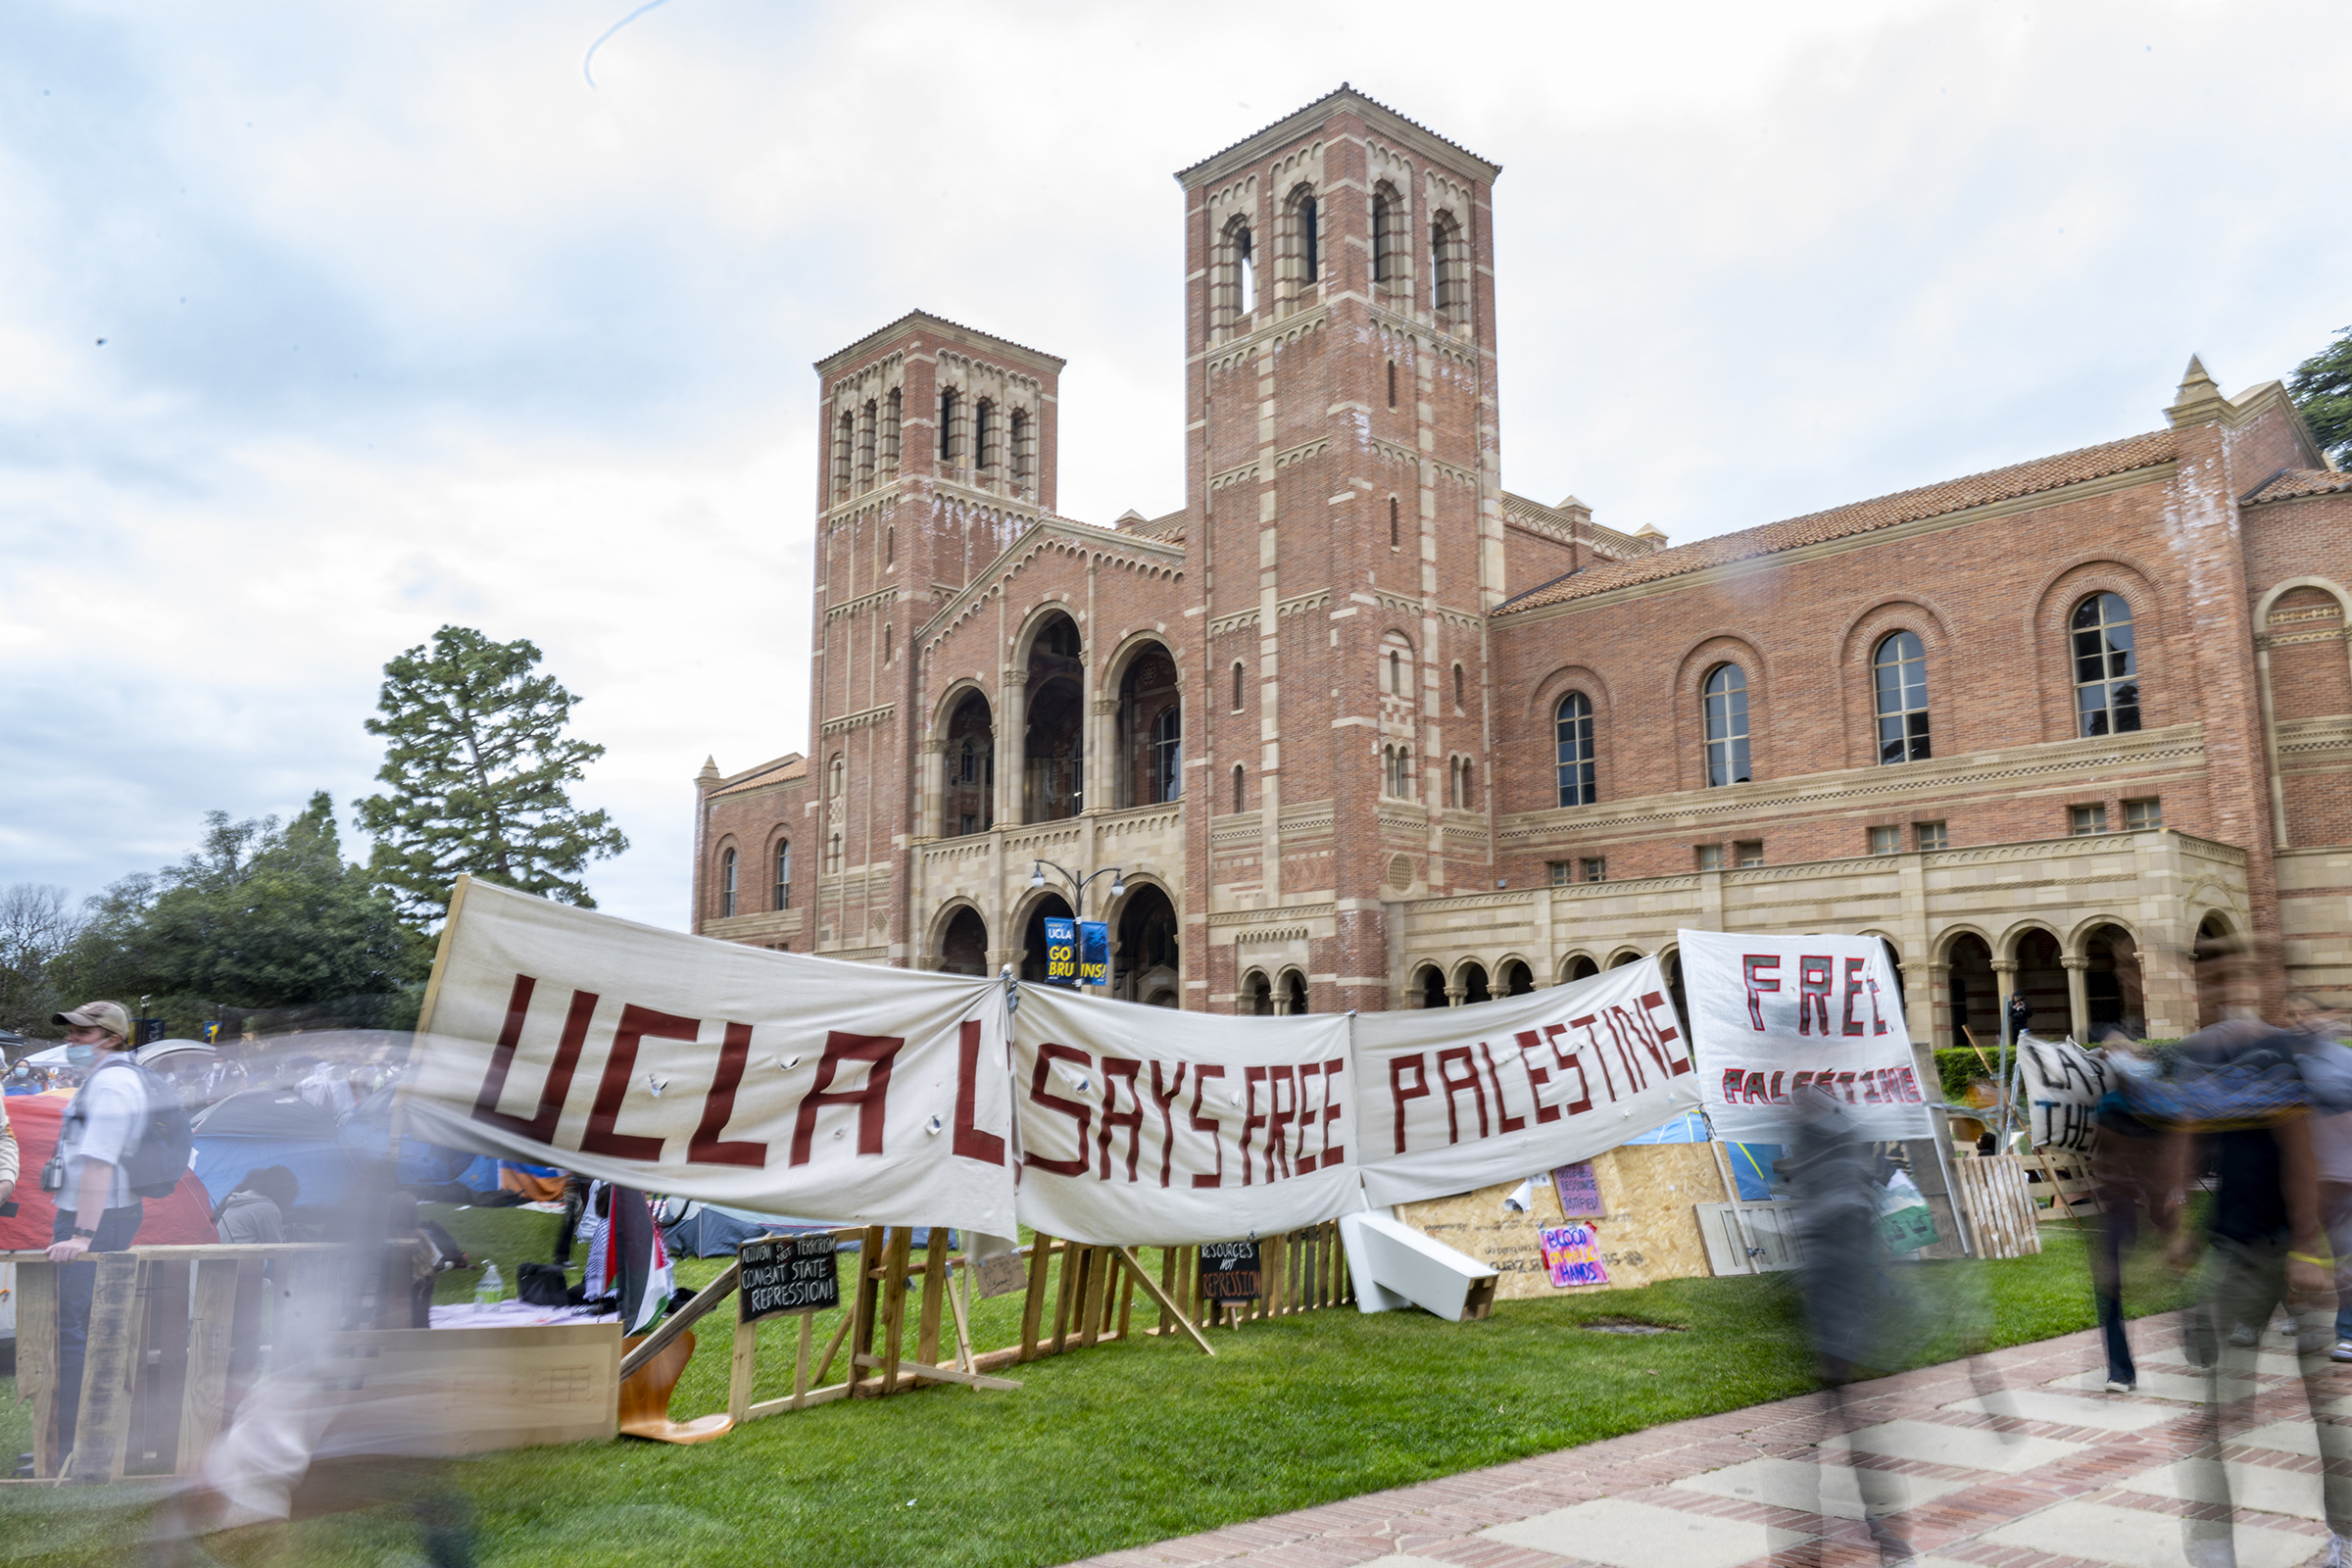 A poster reading “UCLA Says Free Palestine” hangs on the barrier of the pro-Palestinian encampment on April 25. The community expressed mixed sentiments toward the encampment, with some offering support and others voicing concerns.